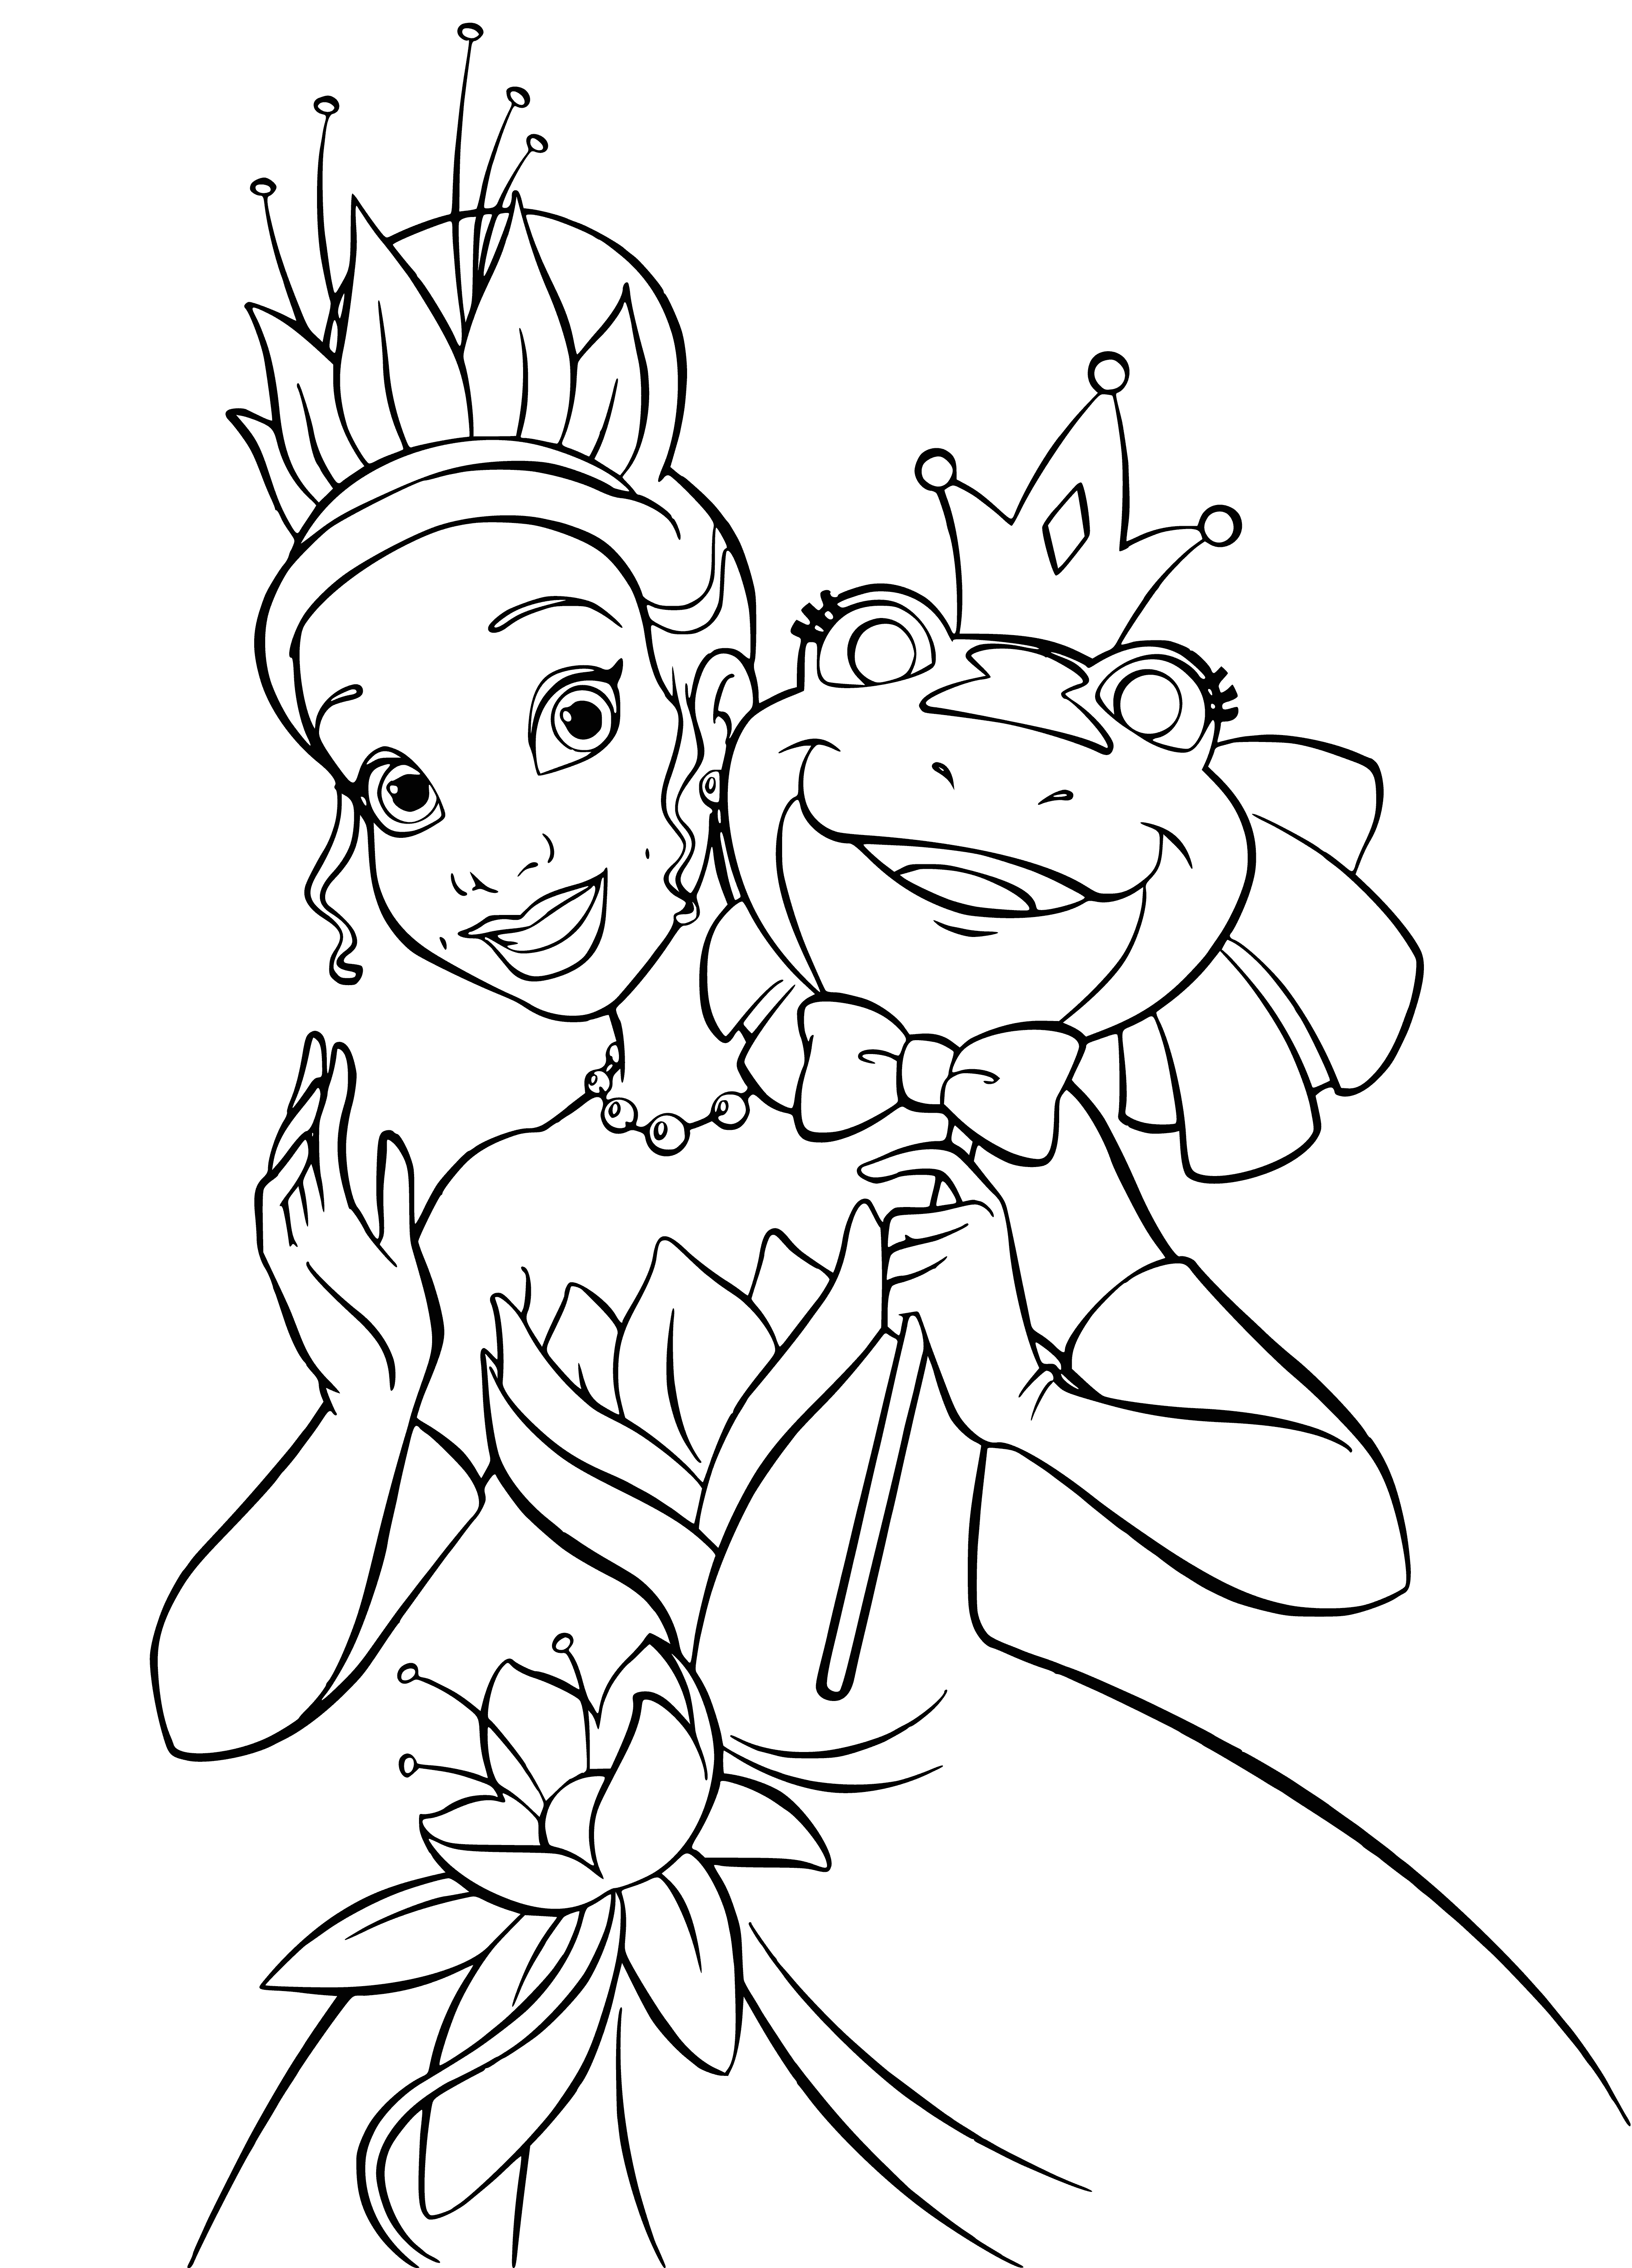 Tiana with a mask coloring page